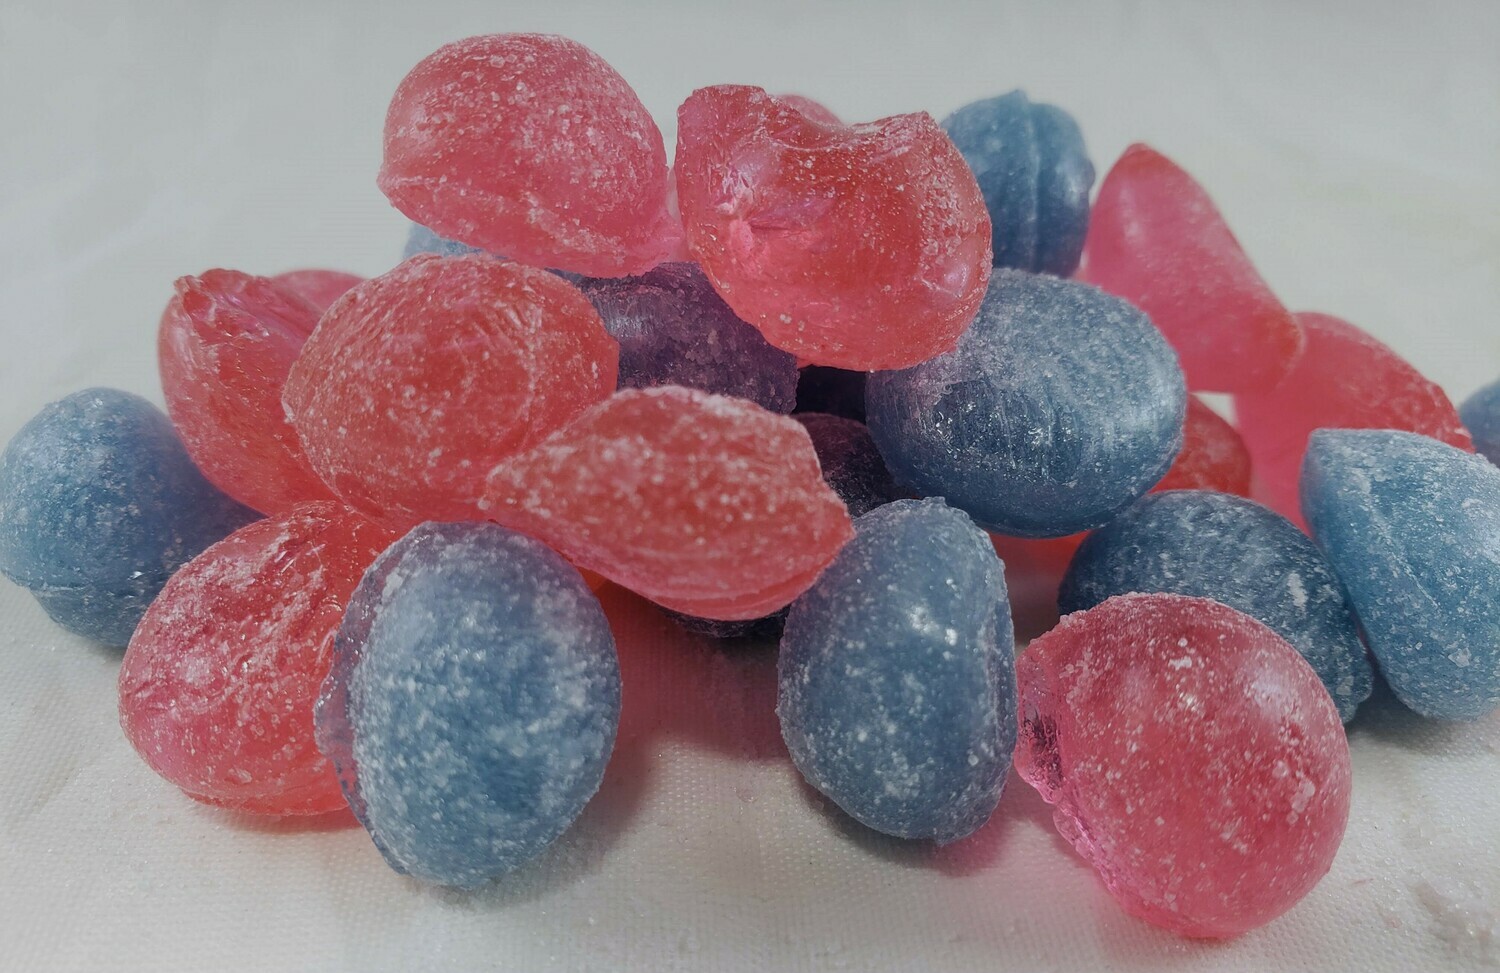 Cotton Candy Flavored Hard Candy Drops, 4.5 ounces